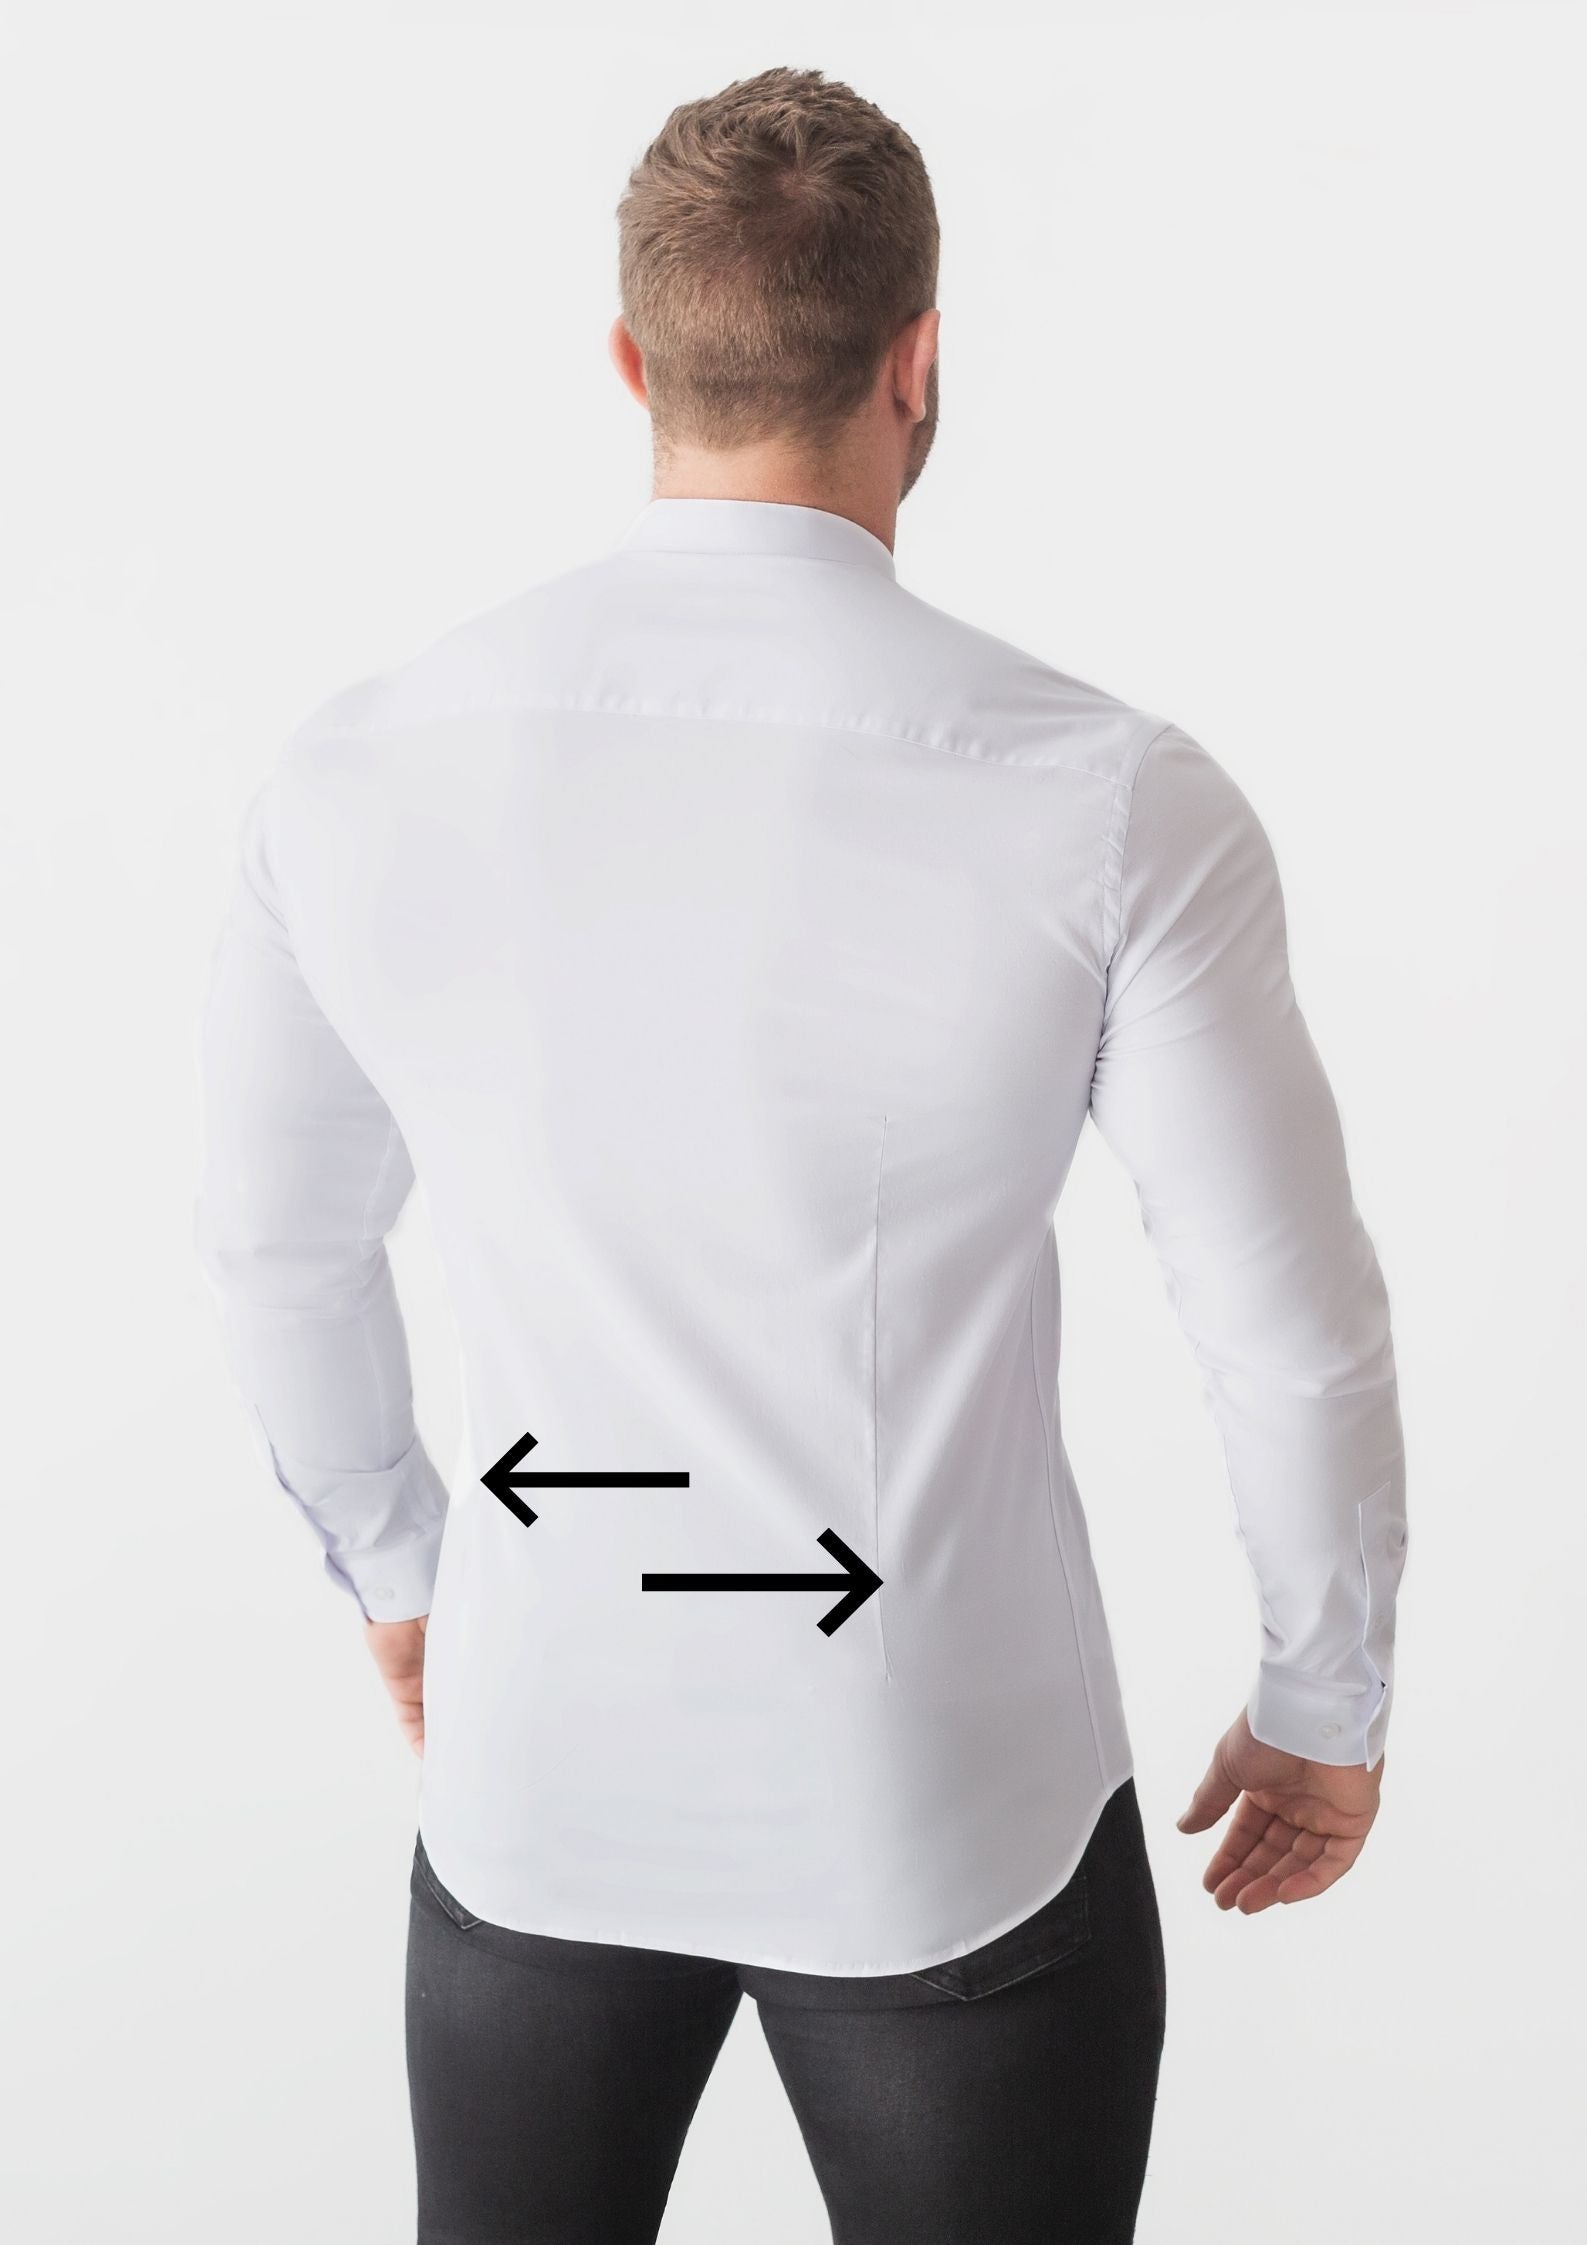 How to use a dart: top tips for fitting and shaping garments 